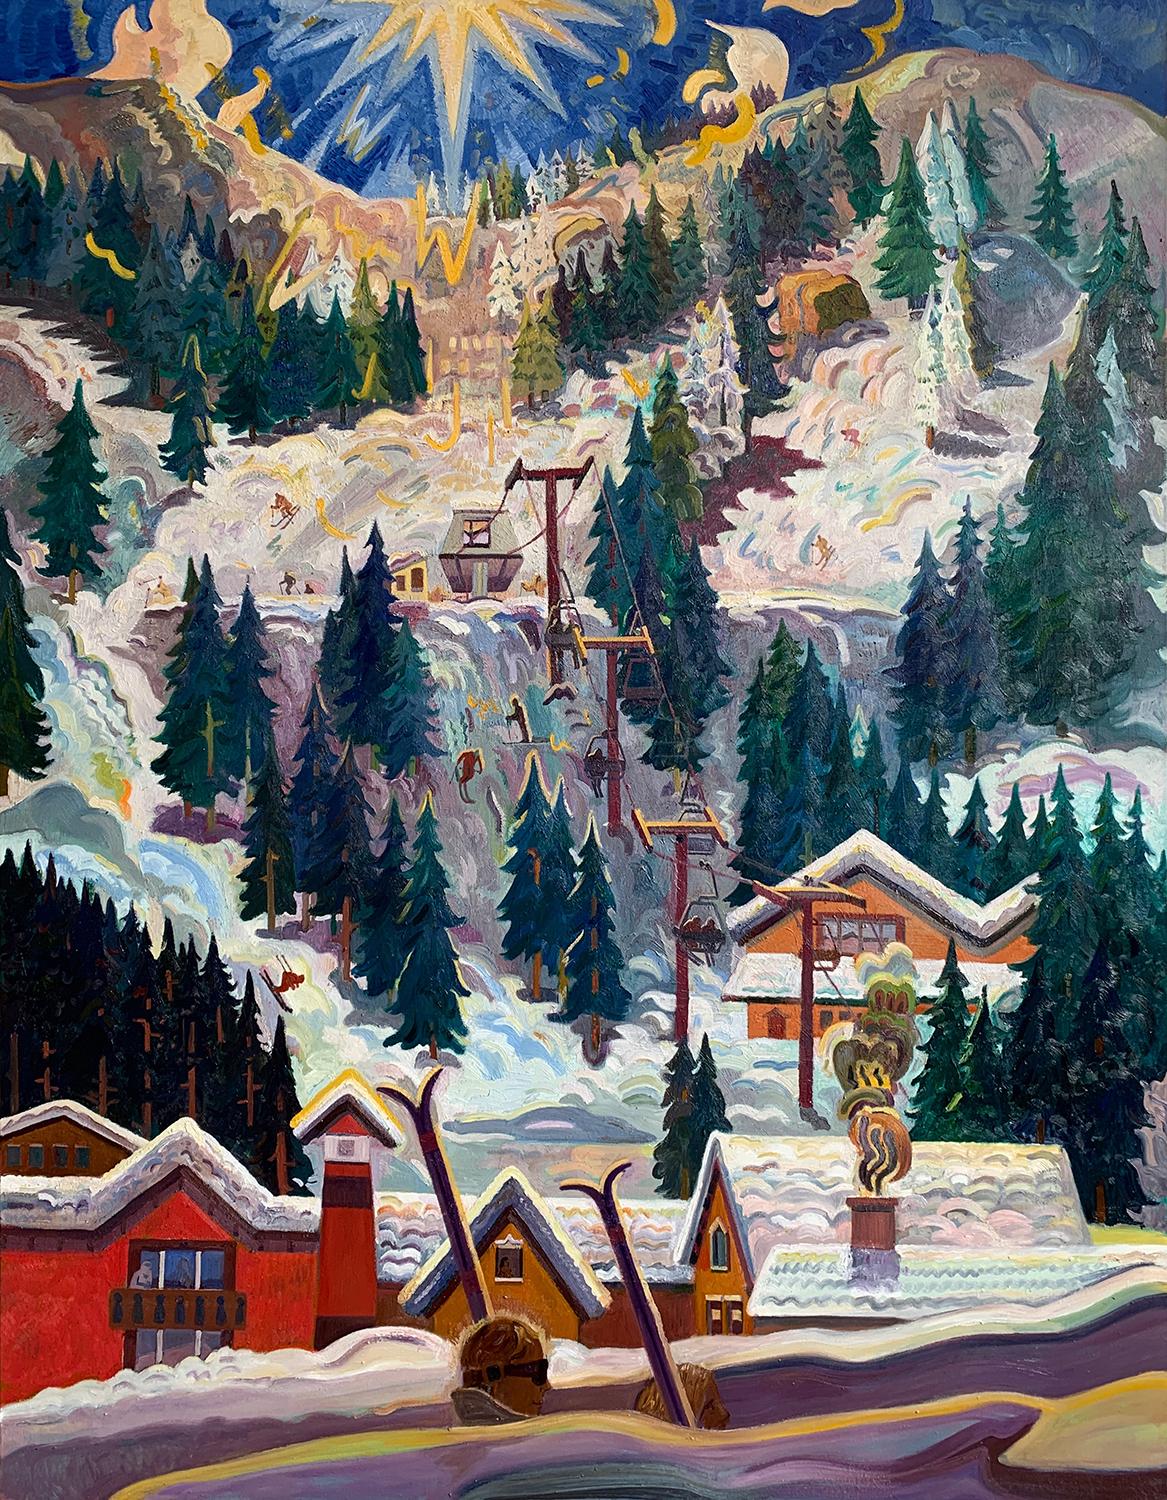 Aaron Zulpo Landscape Painting - The First Day of Skiing